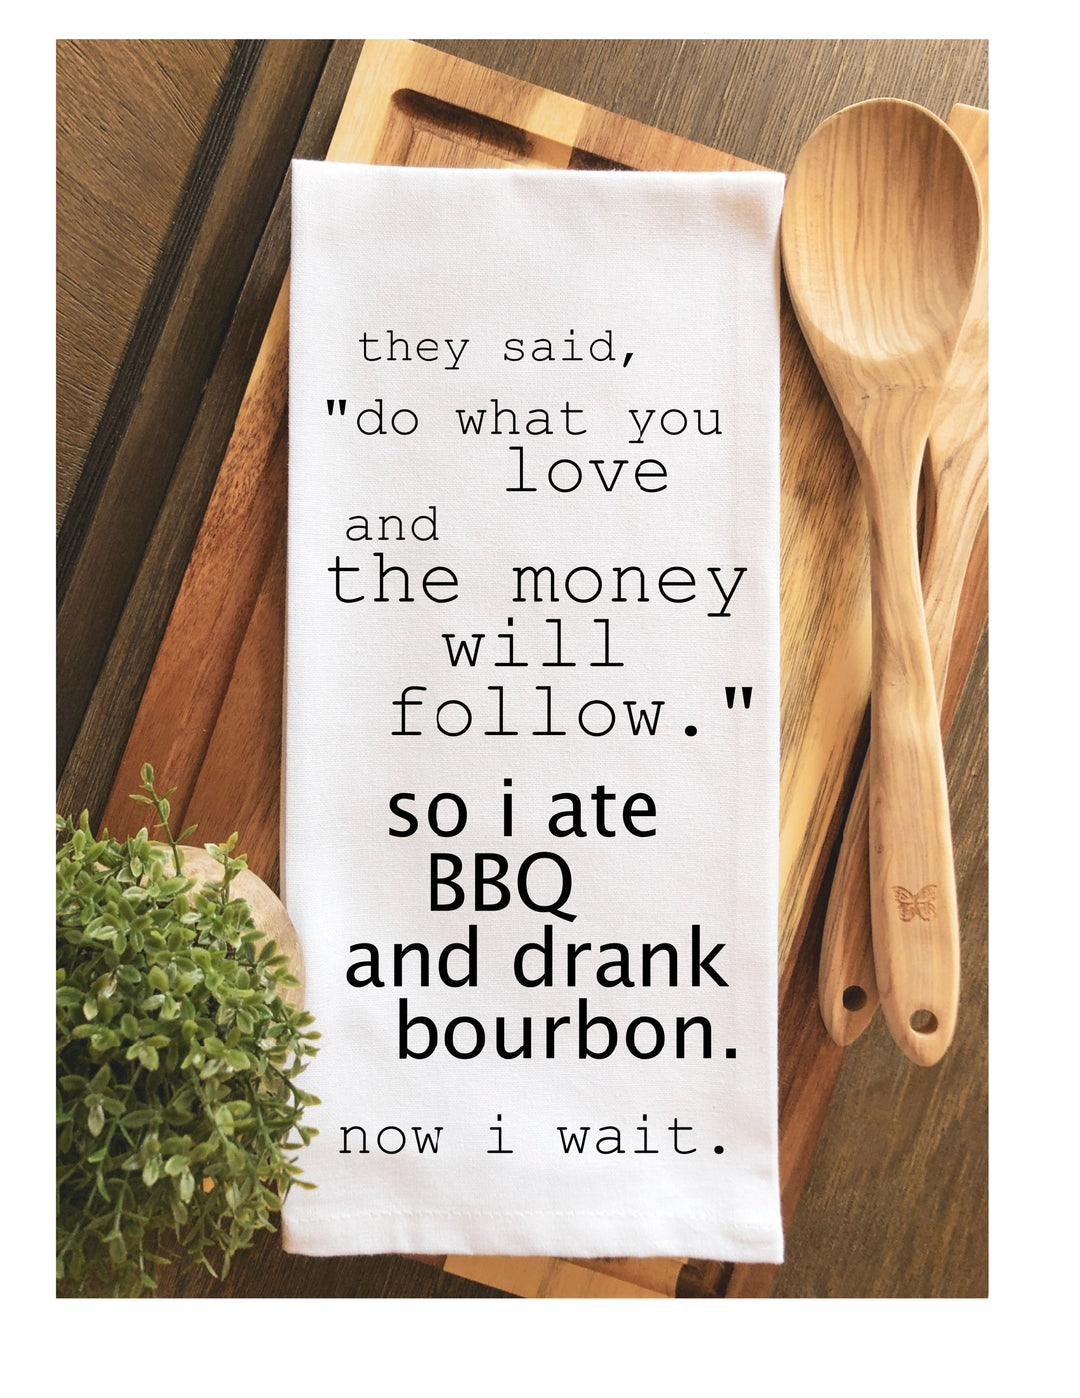 after wine and books, now i wait - humorous bar, tea and kitchen towel LG